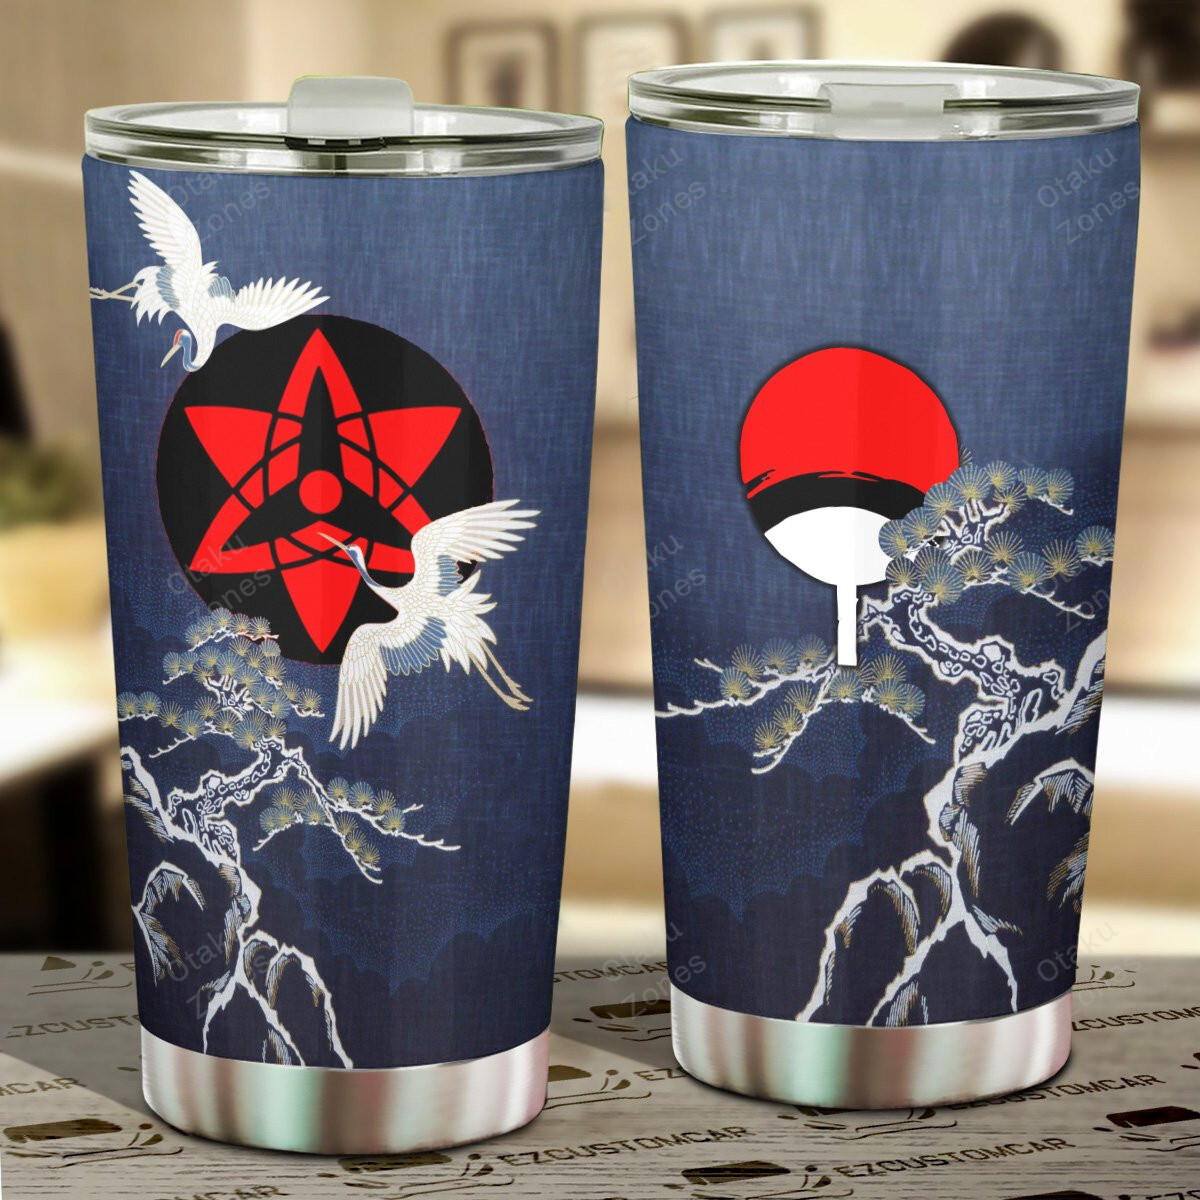 Go ahead and order your new tumbler now! 126